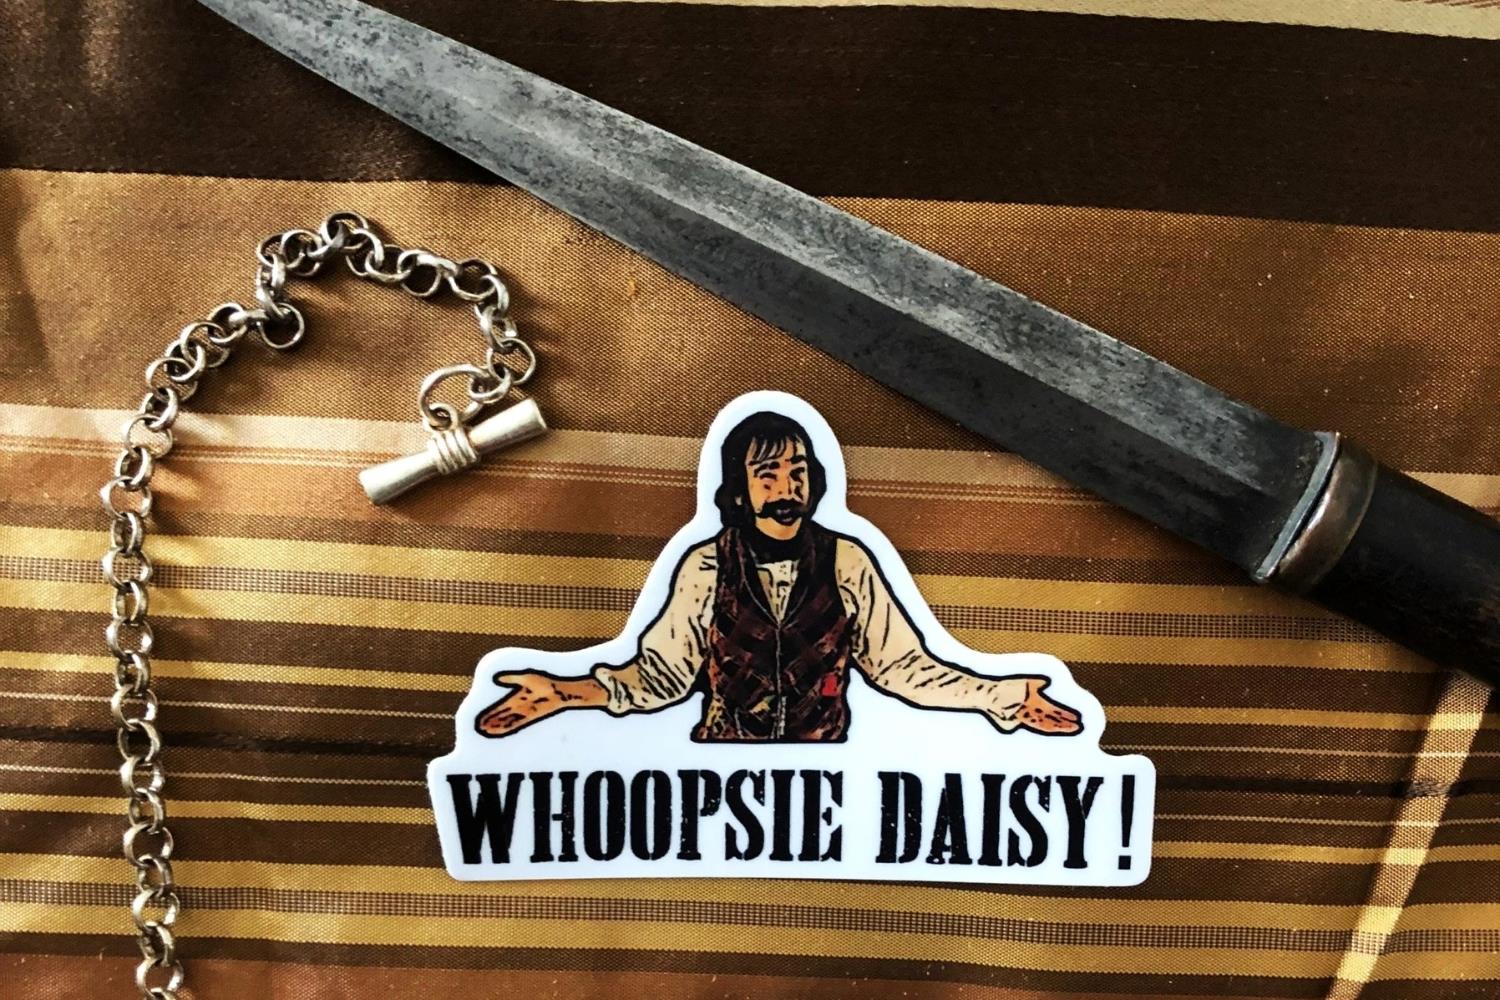 The Surprising Origins Of ‘Whoopsie Daisy’ Revealed!